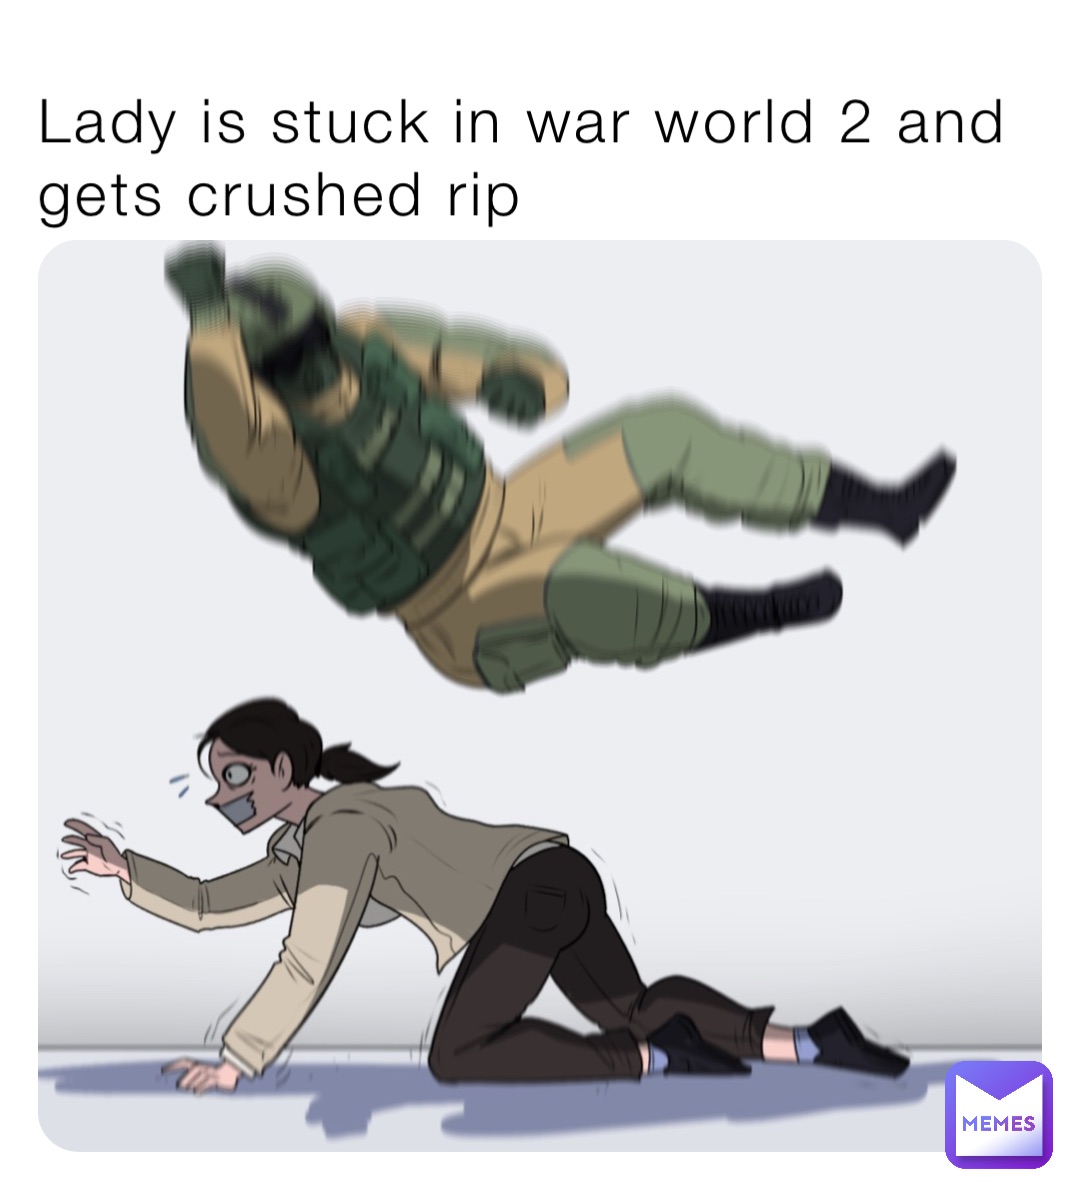 Lady is stuck in war world 2 and gets crushed rip